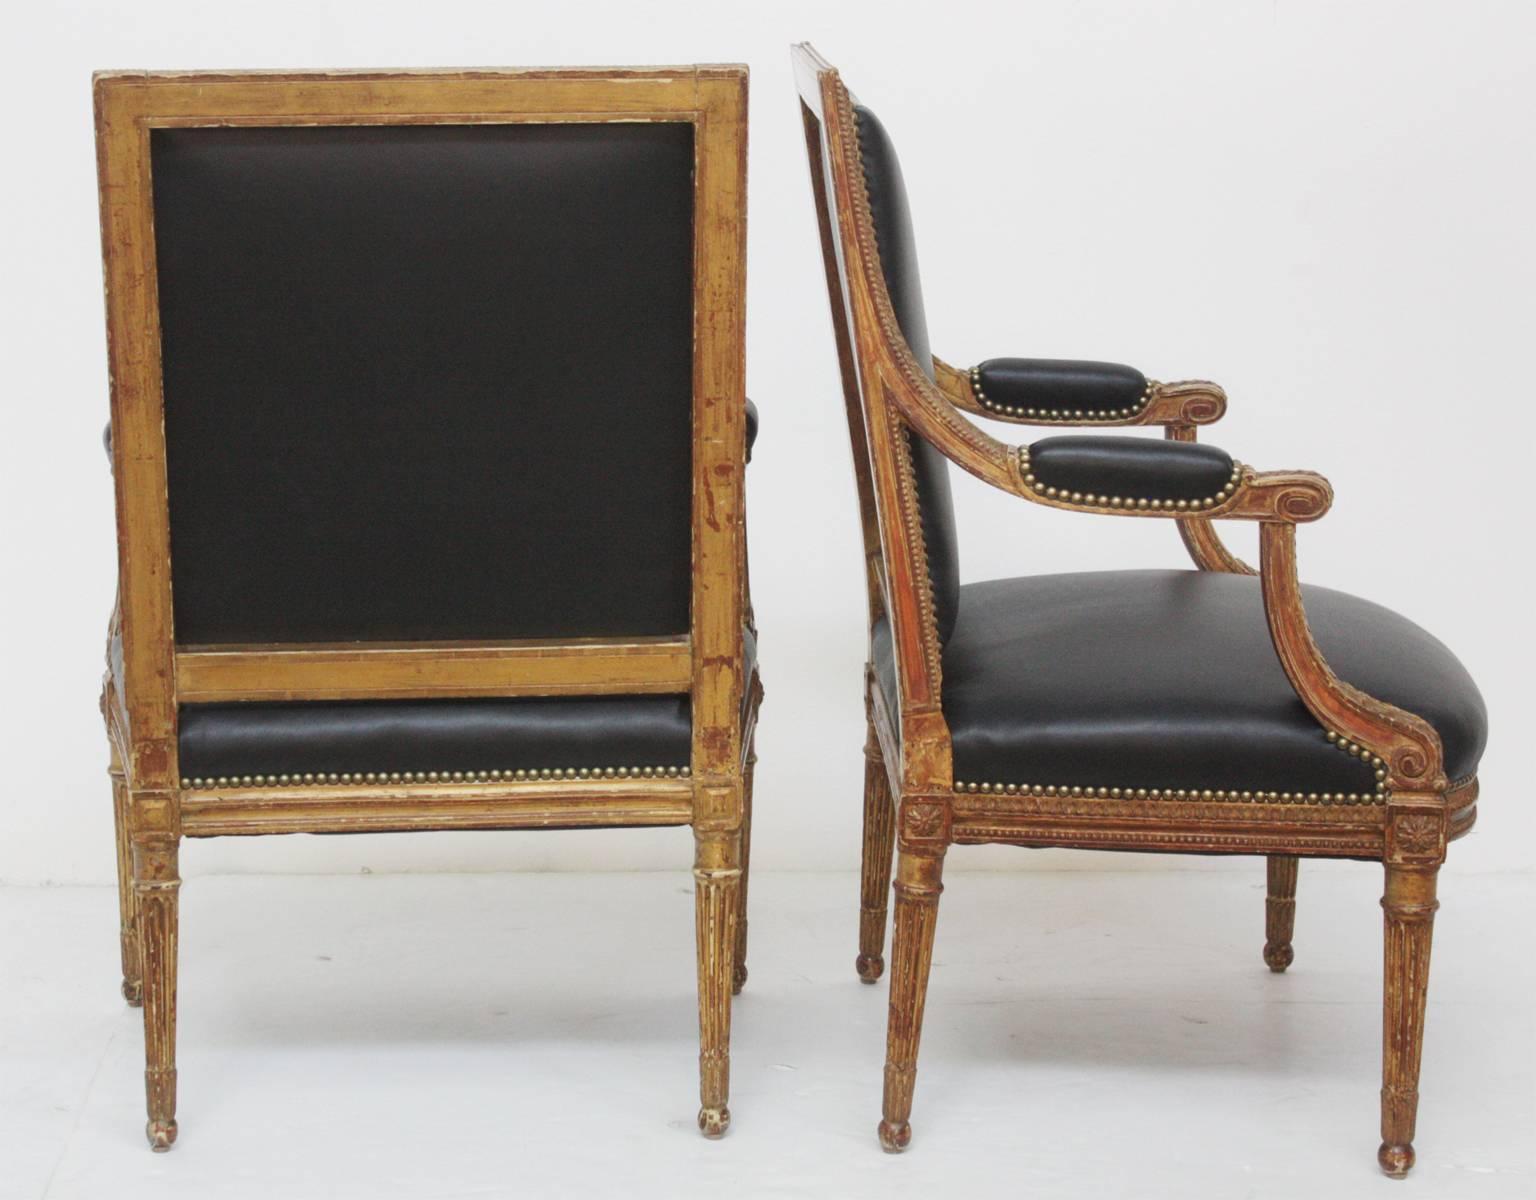 French Louis XVI Style Carved and Gilded Fauteuils, Two Pairs